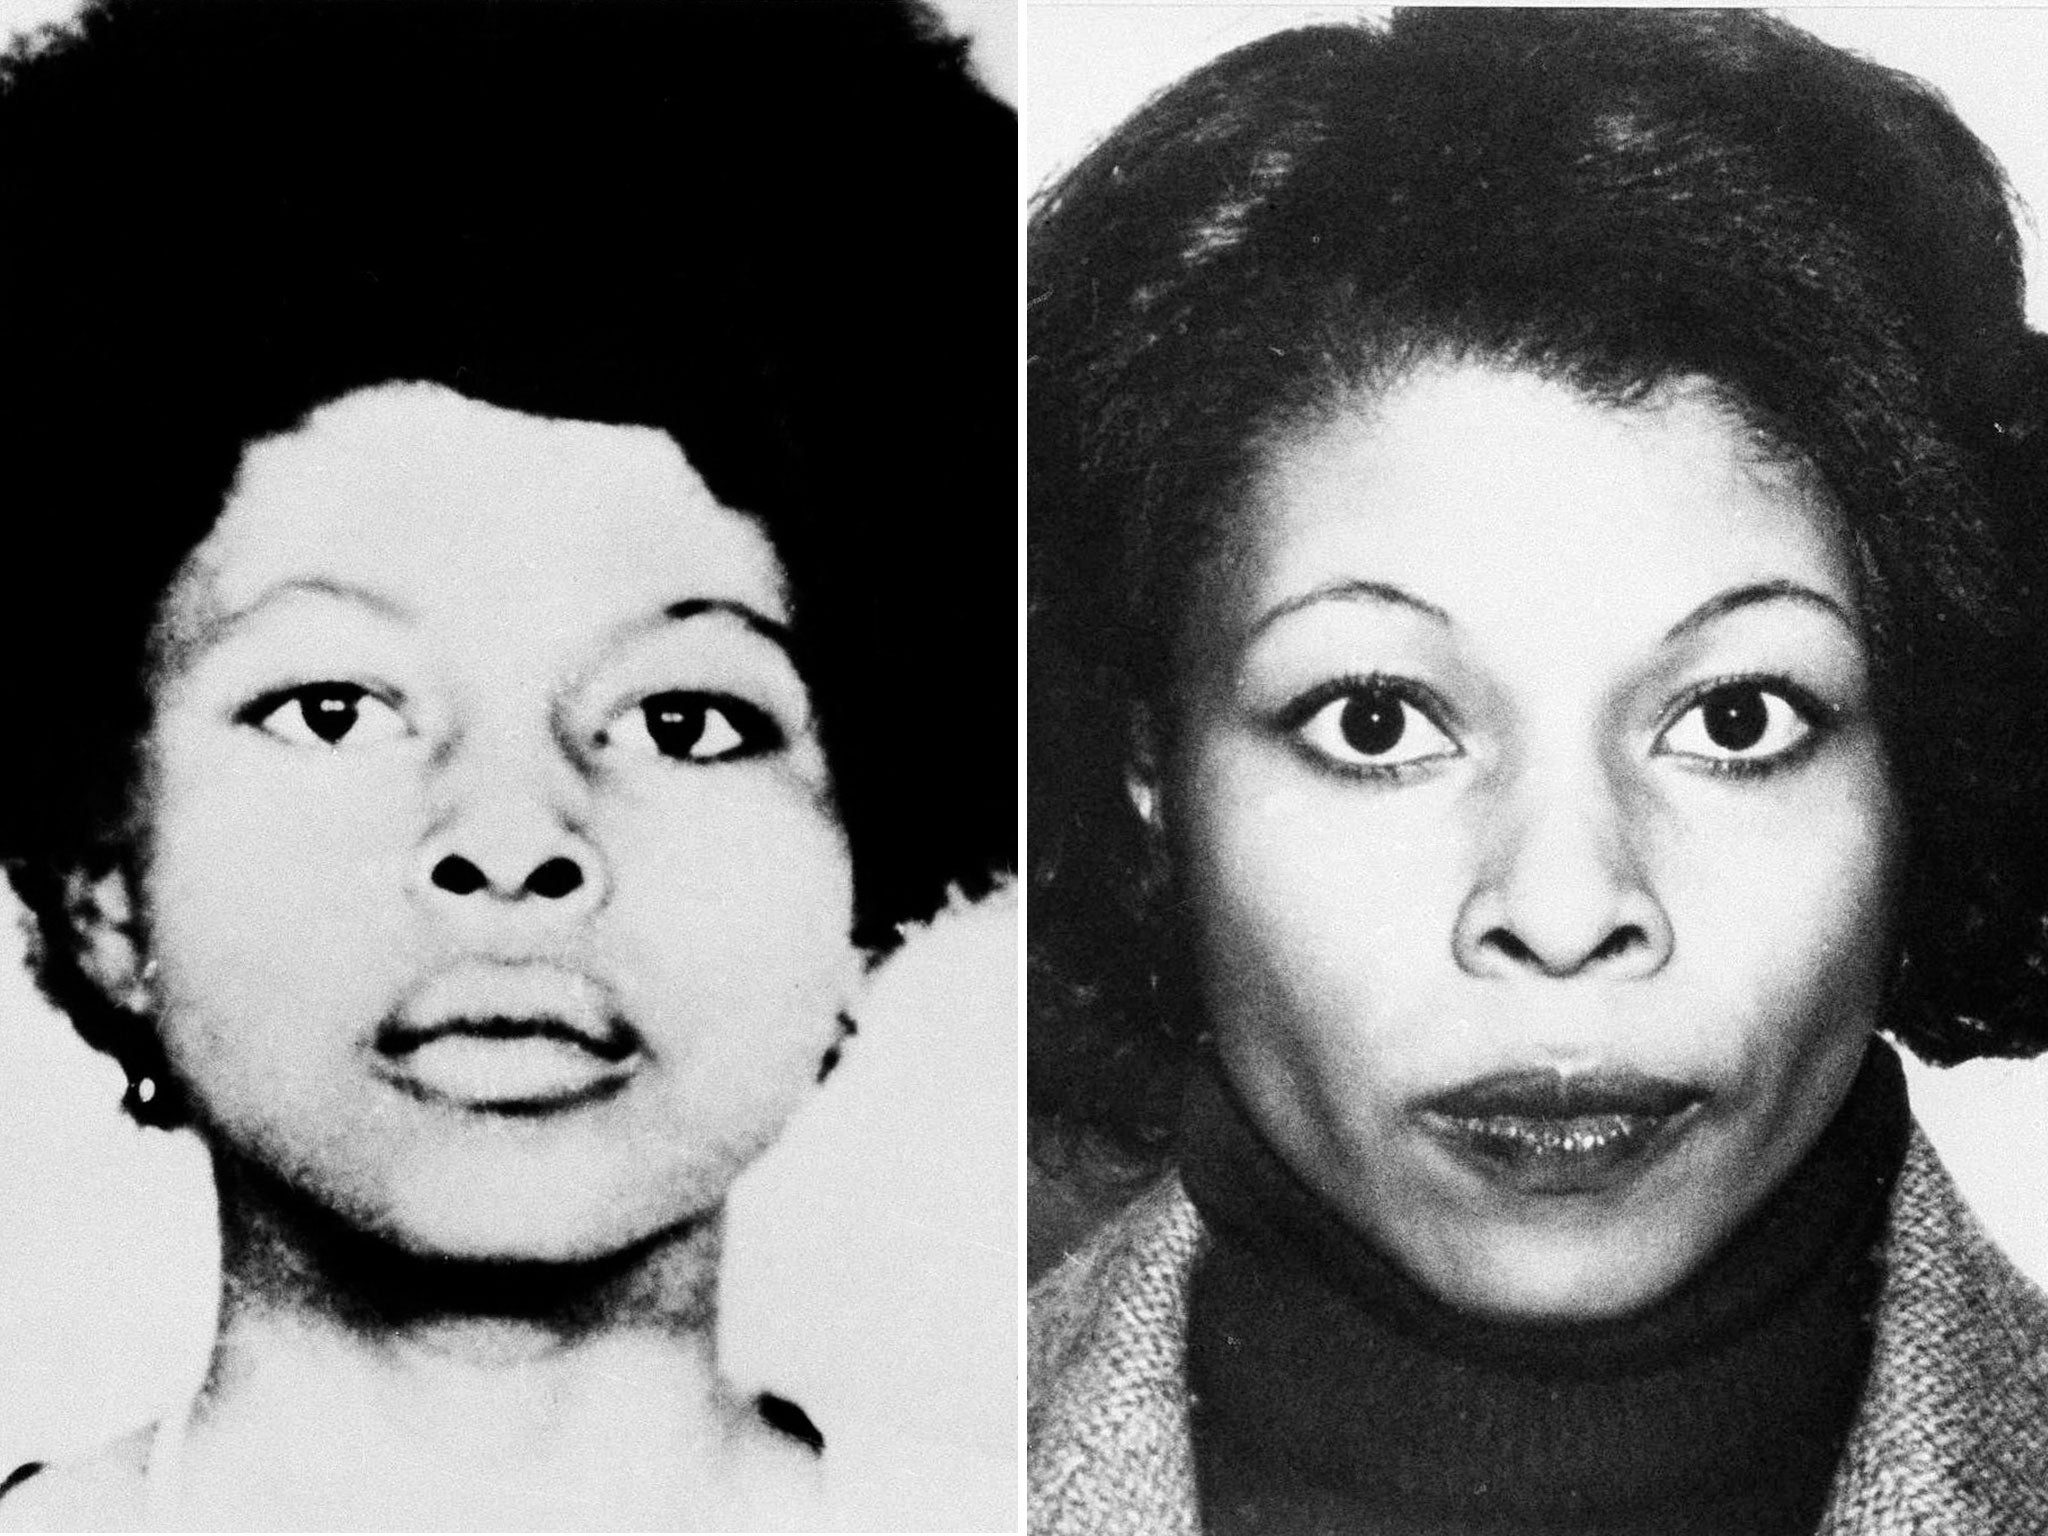 FBI photos depict various appearances of the convicted murderer JoAnne Chesimard